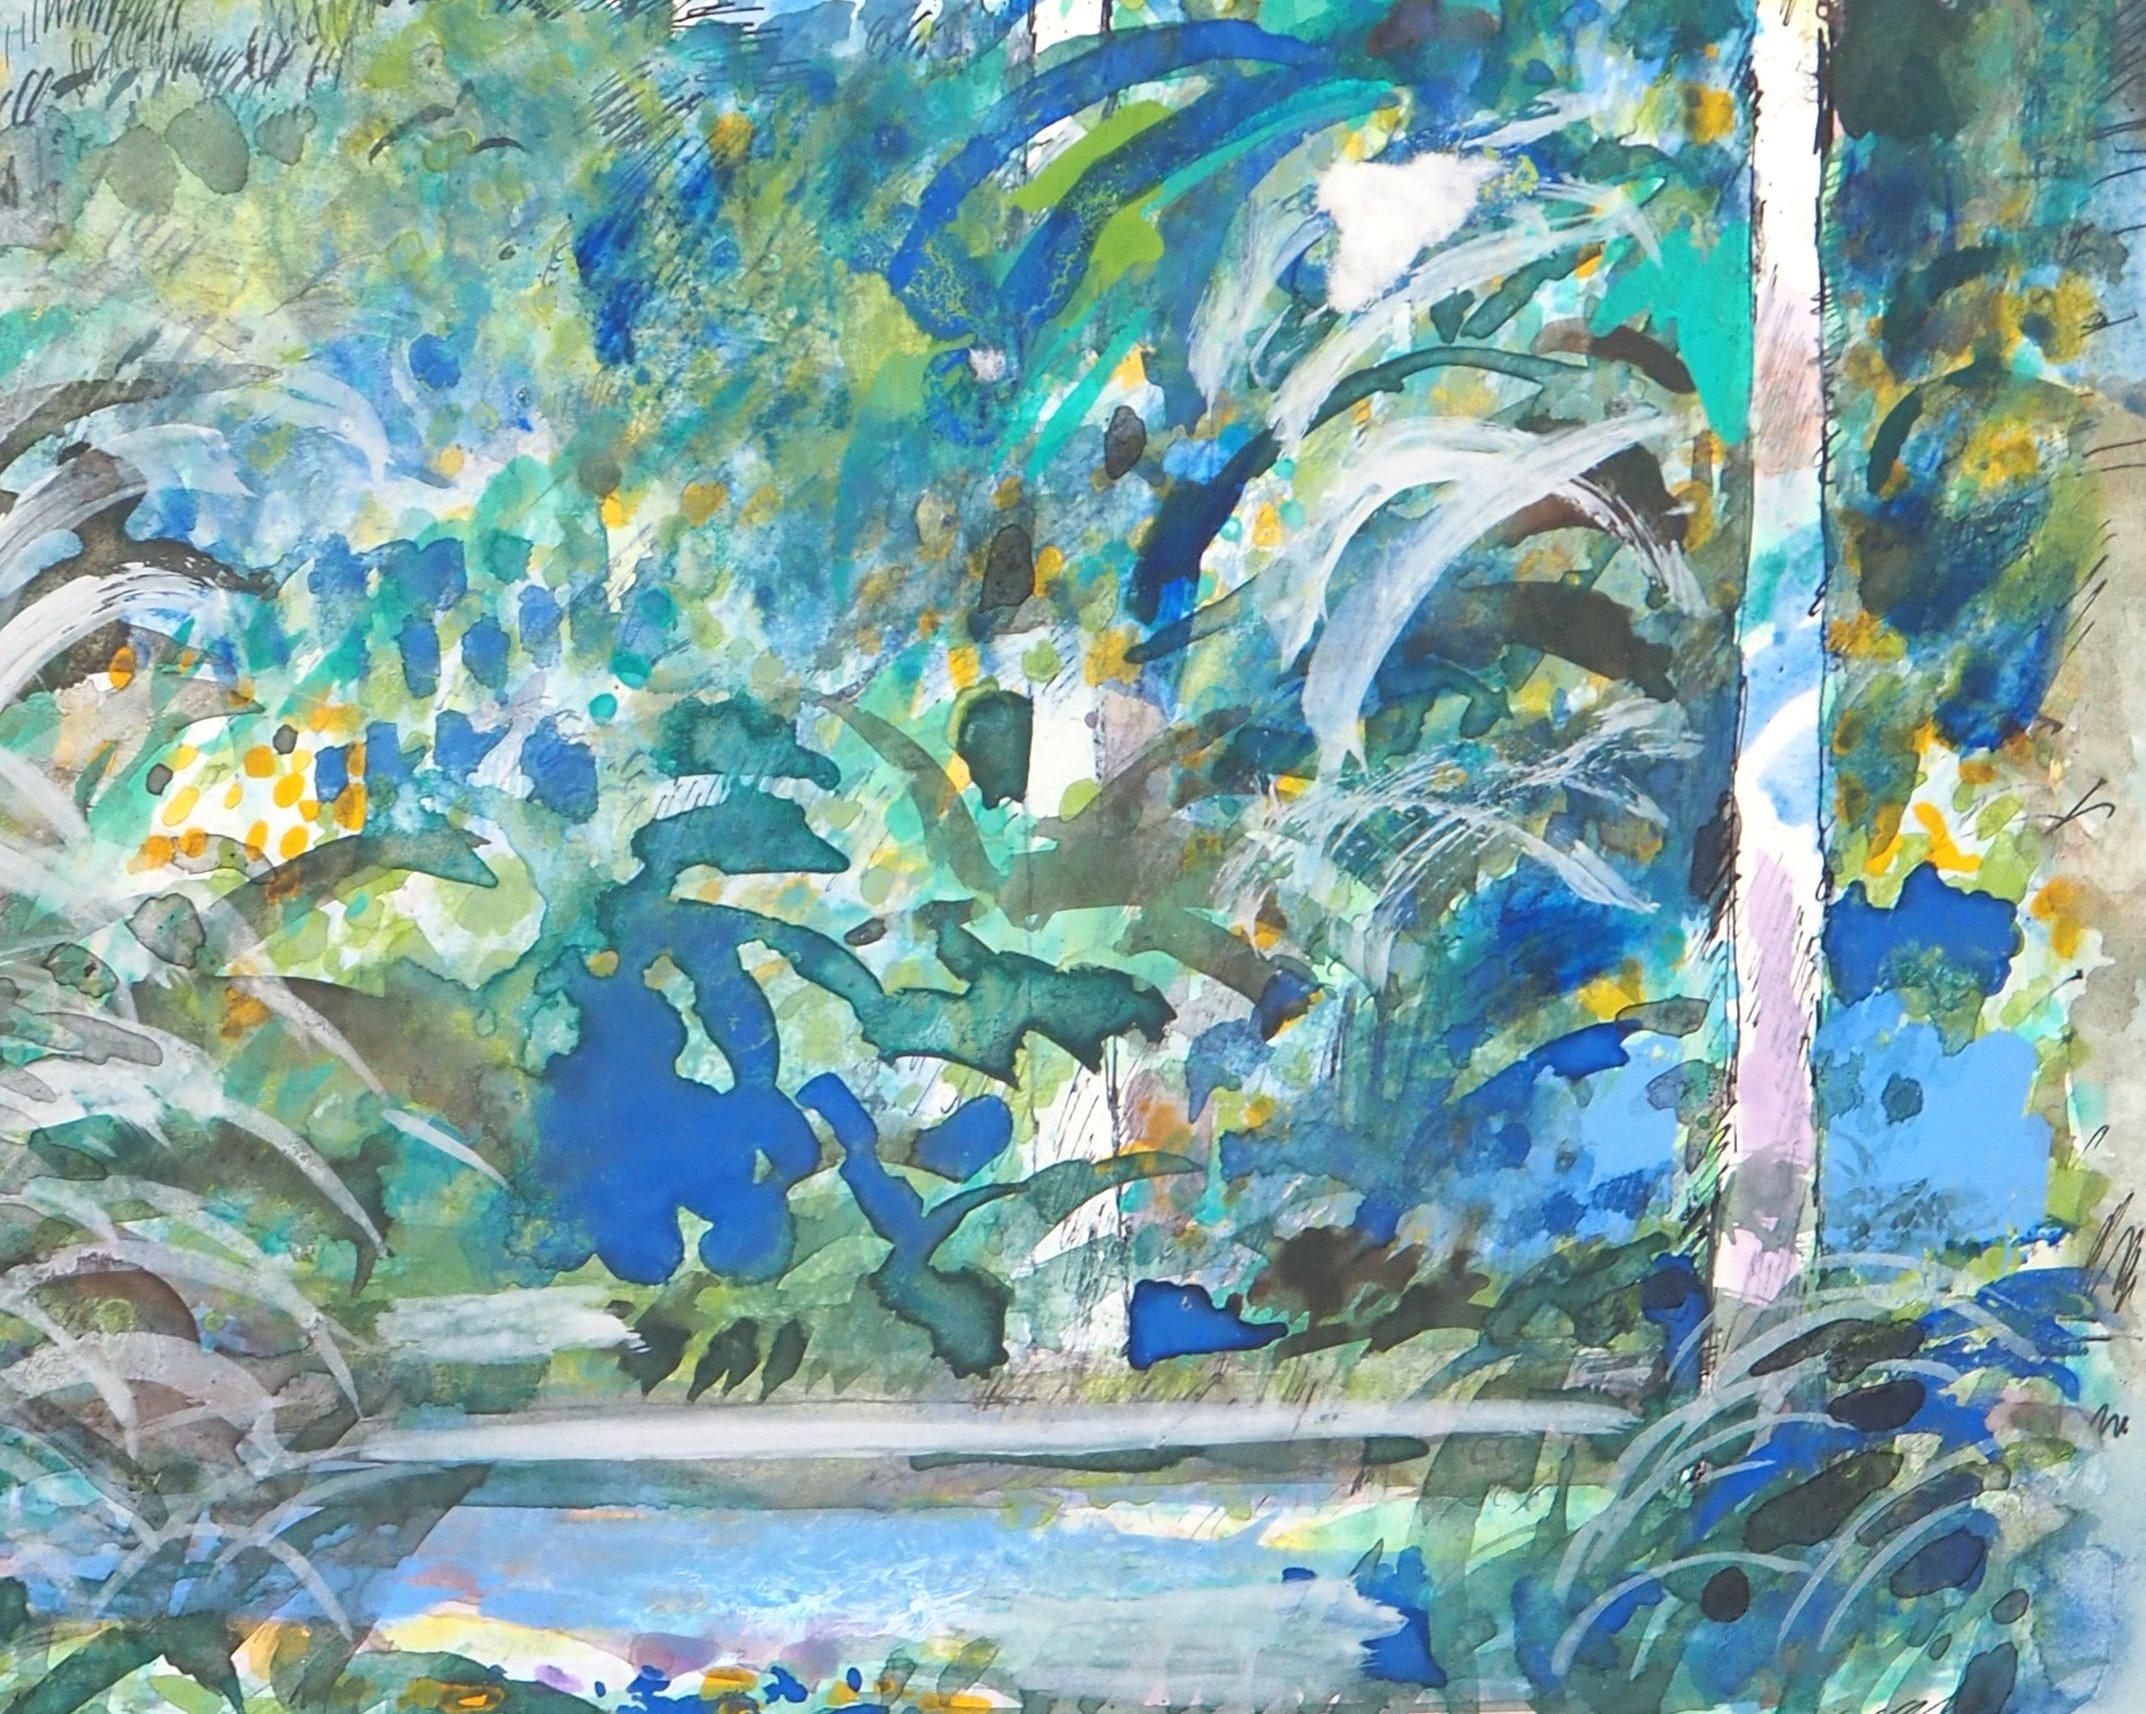 Tropical Dream - Original Handsigned Watercolor, Gouache and Ink Painting - Impressionist Art by Maurice Genis